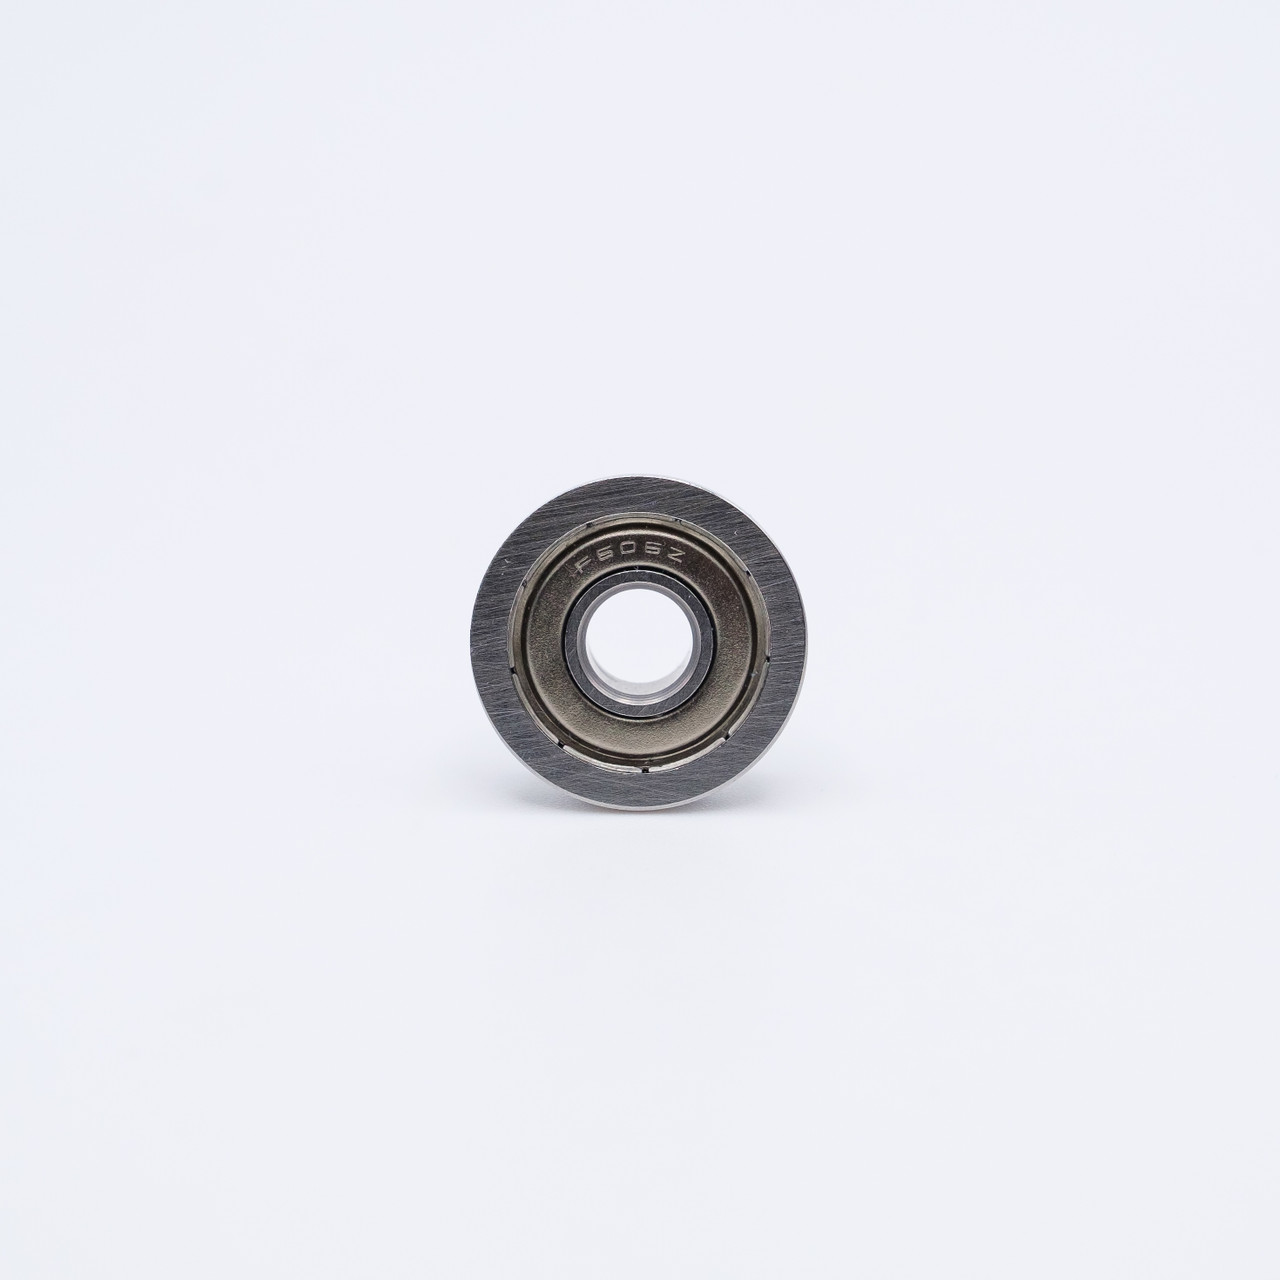 SMF106-ZZ Stainless Steel Mini Flanged Ball Bearing 6x10x3mm Bottom View